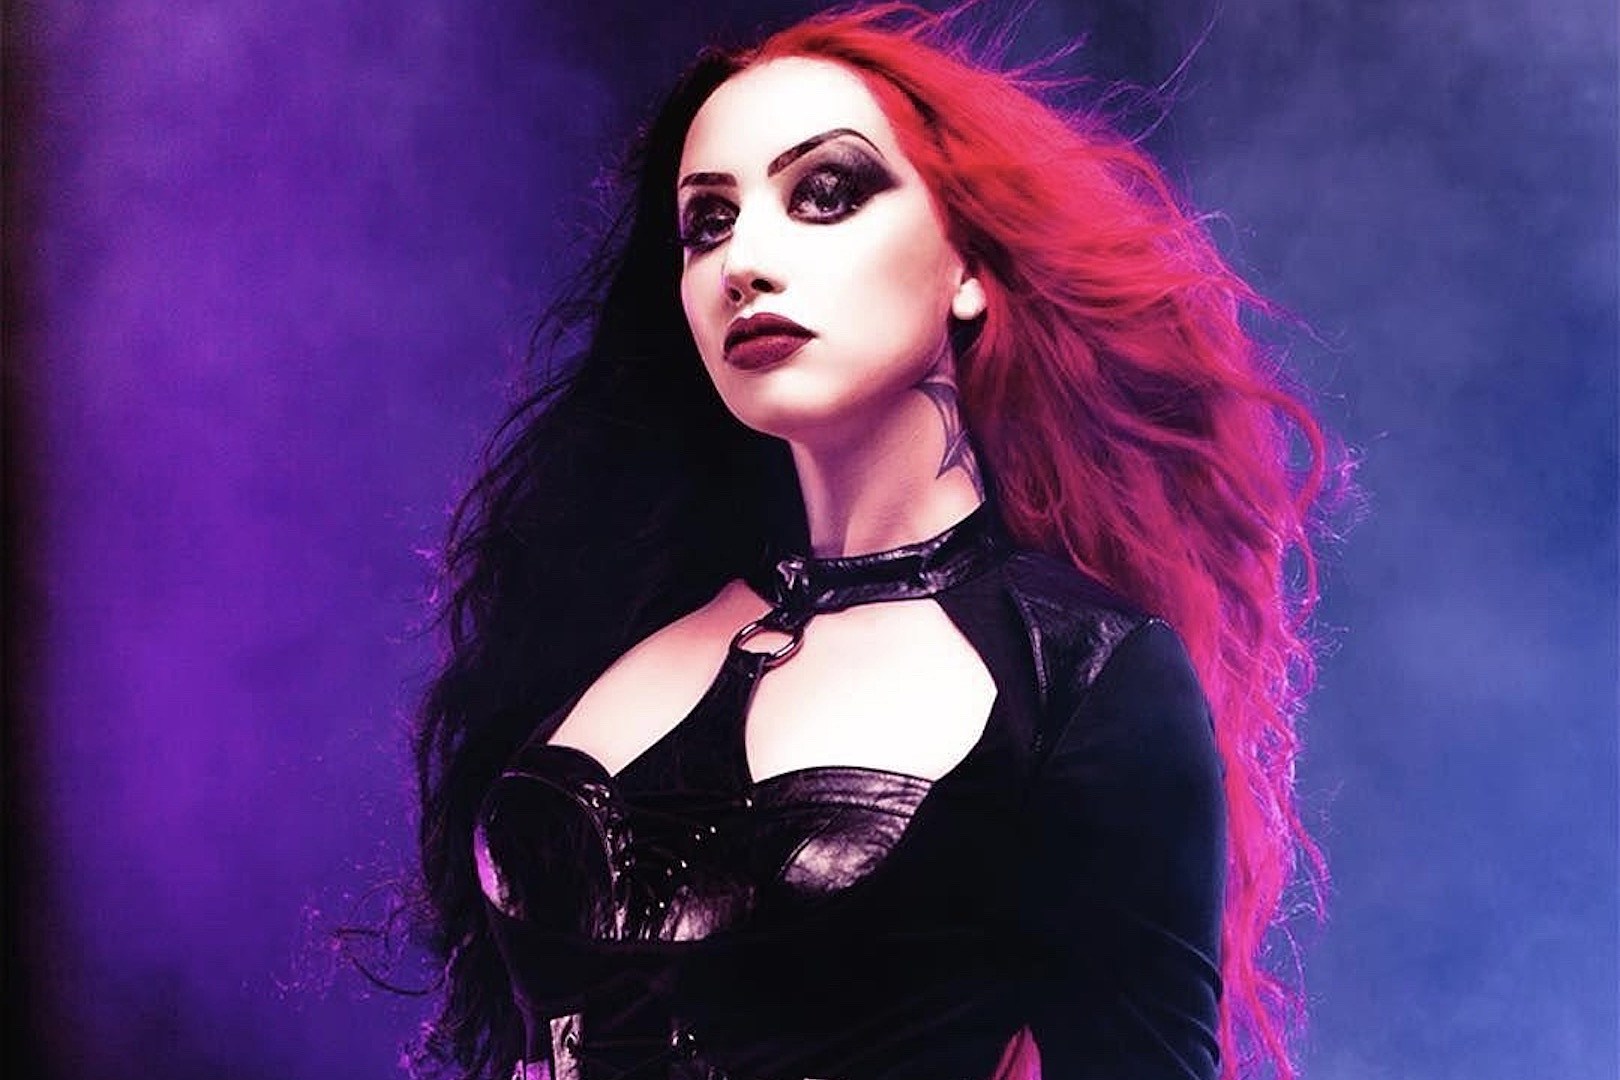 Ash Costello: BOTDF's Dahvie Vanity Almost Choked Me to Death